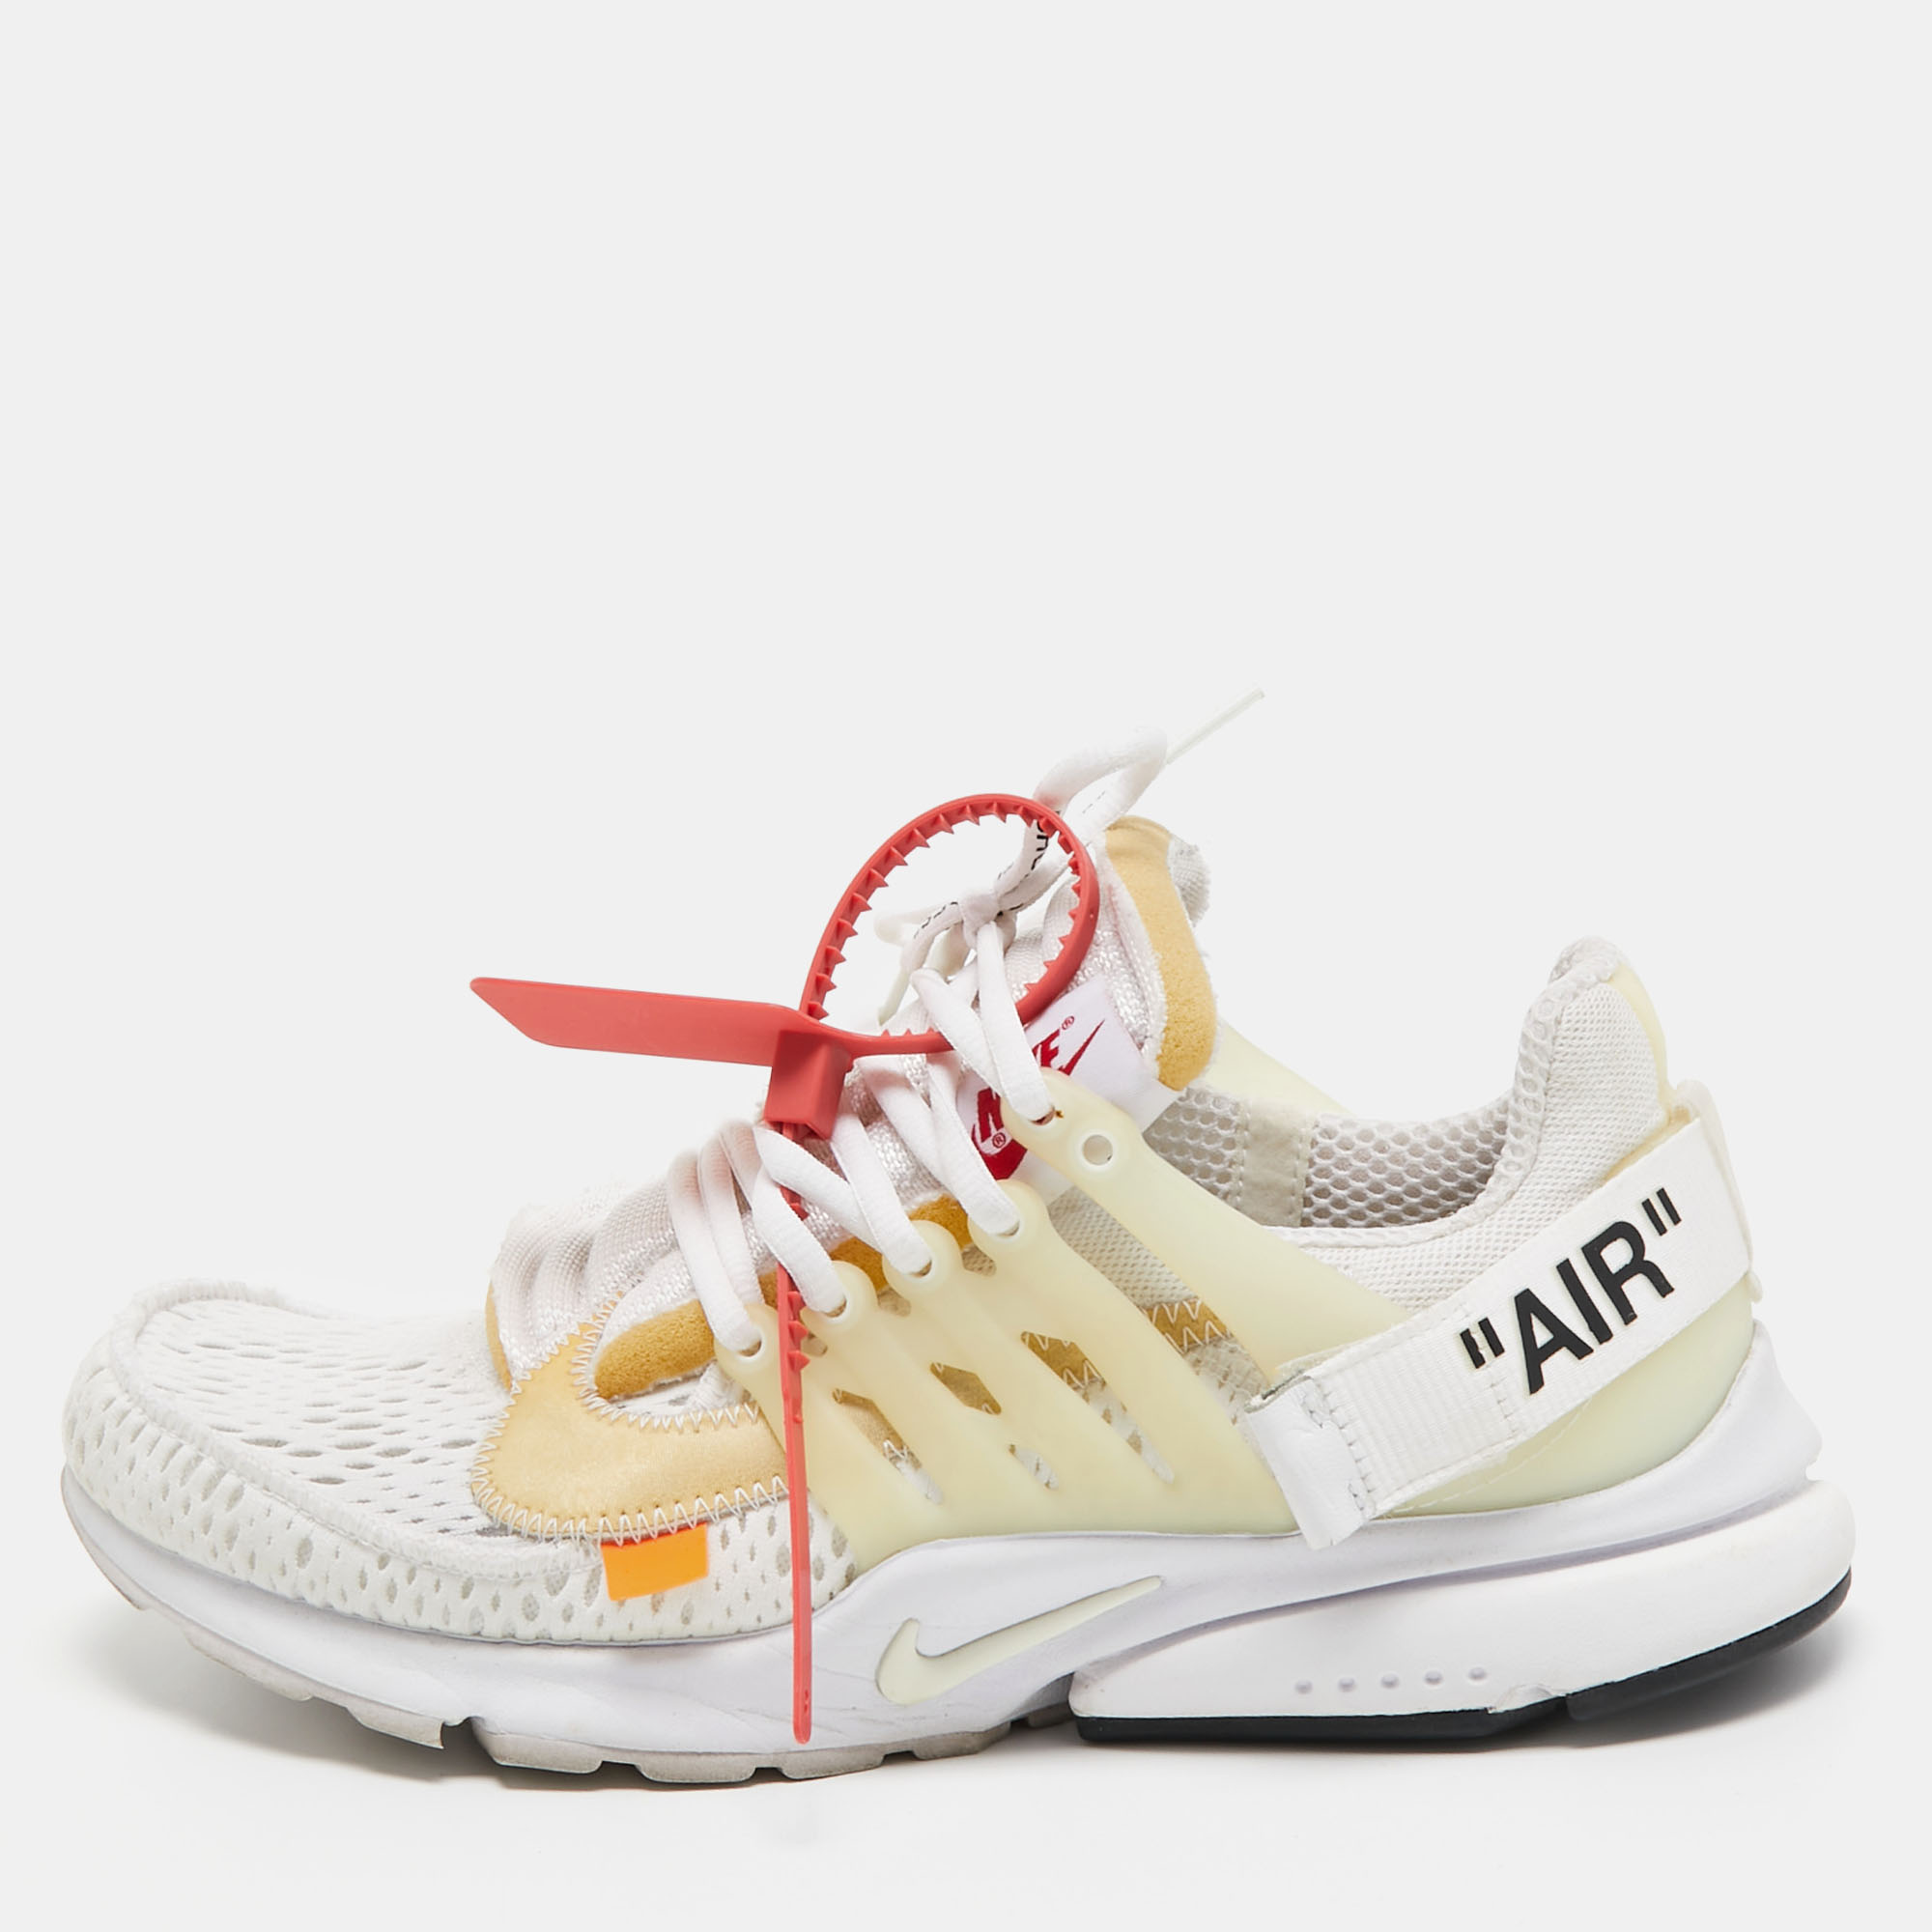 

Nike x Off White White Fabric Air Presto Low Trainers Sneakers Size